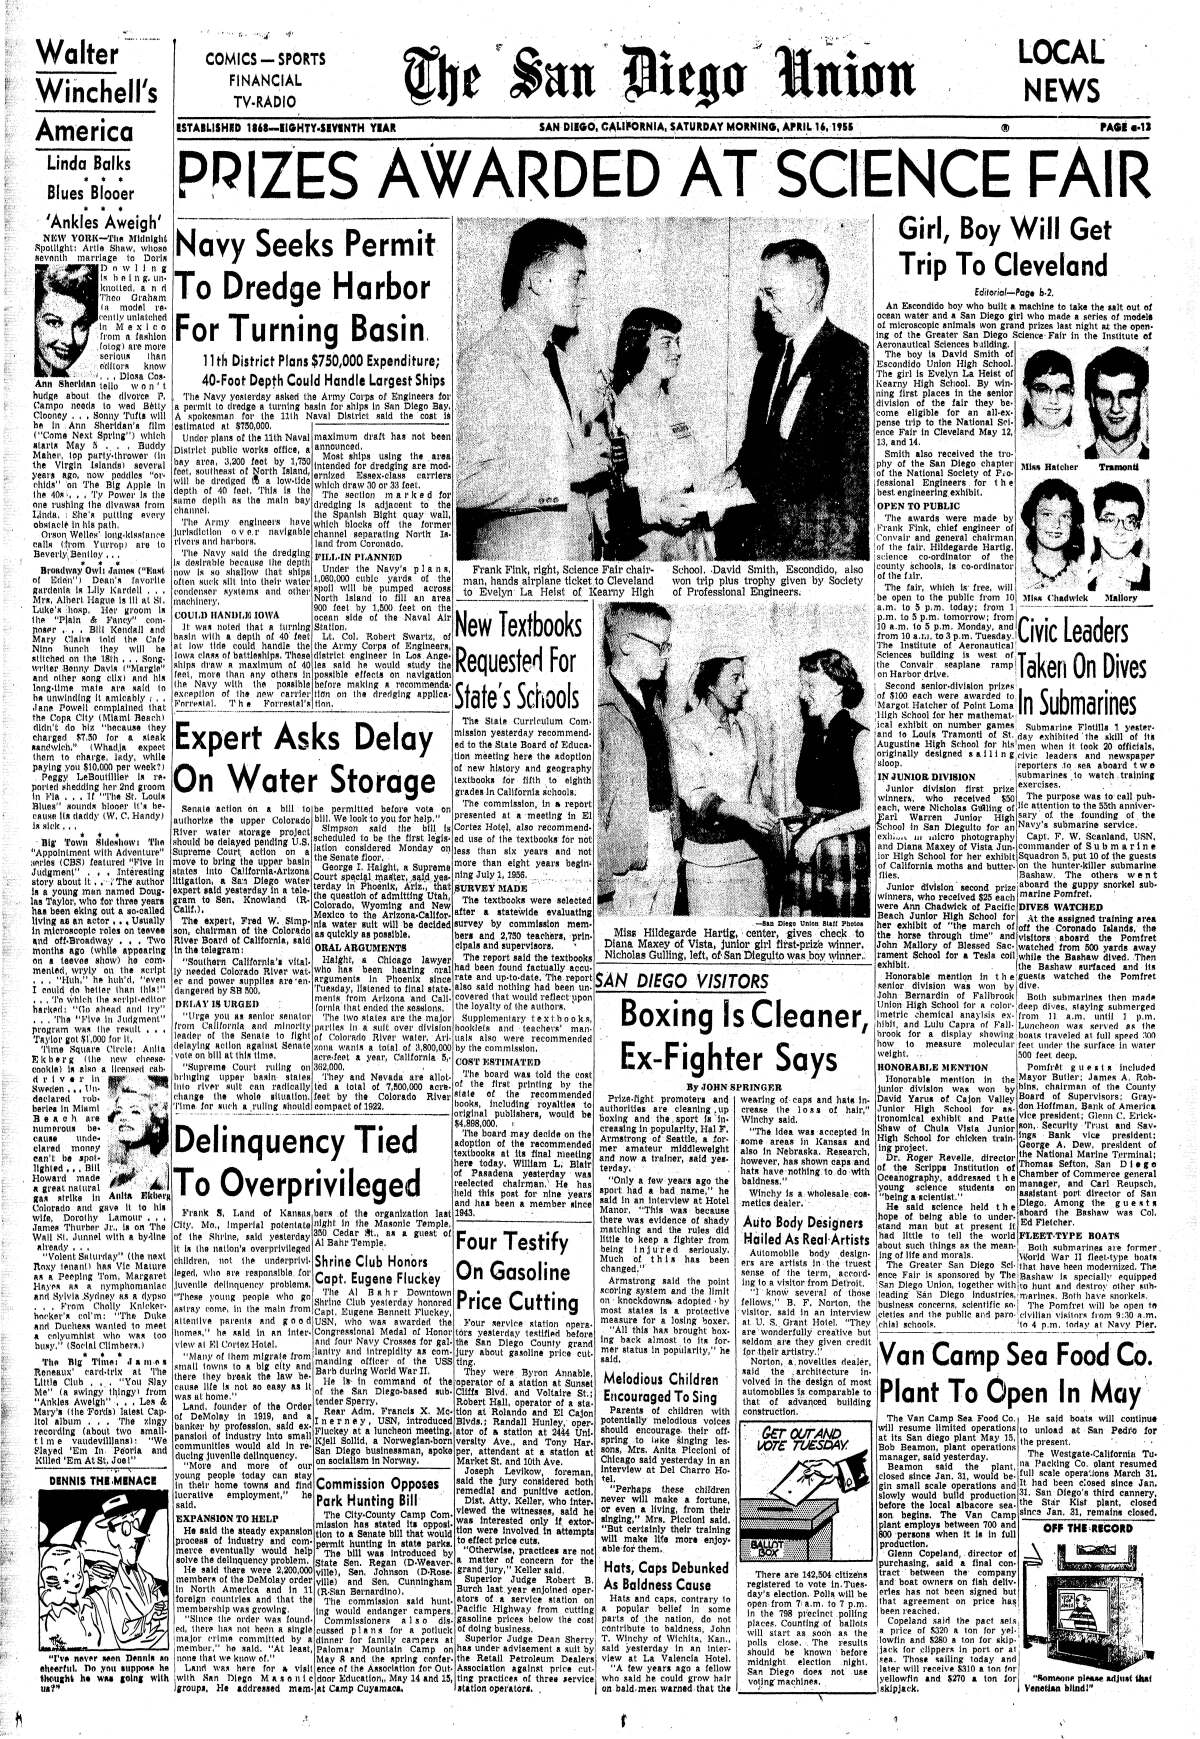 "Prizes awarded at science fair" published April 16, 1955 in The San Diego Union.